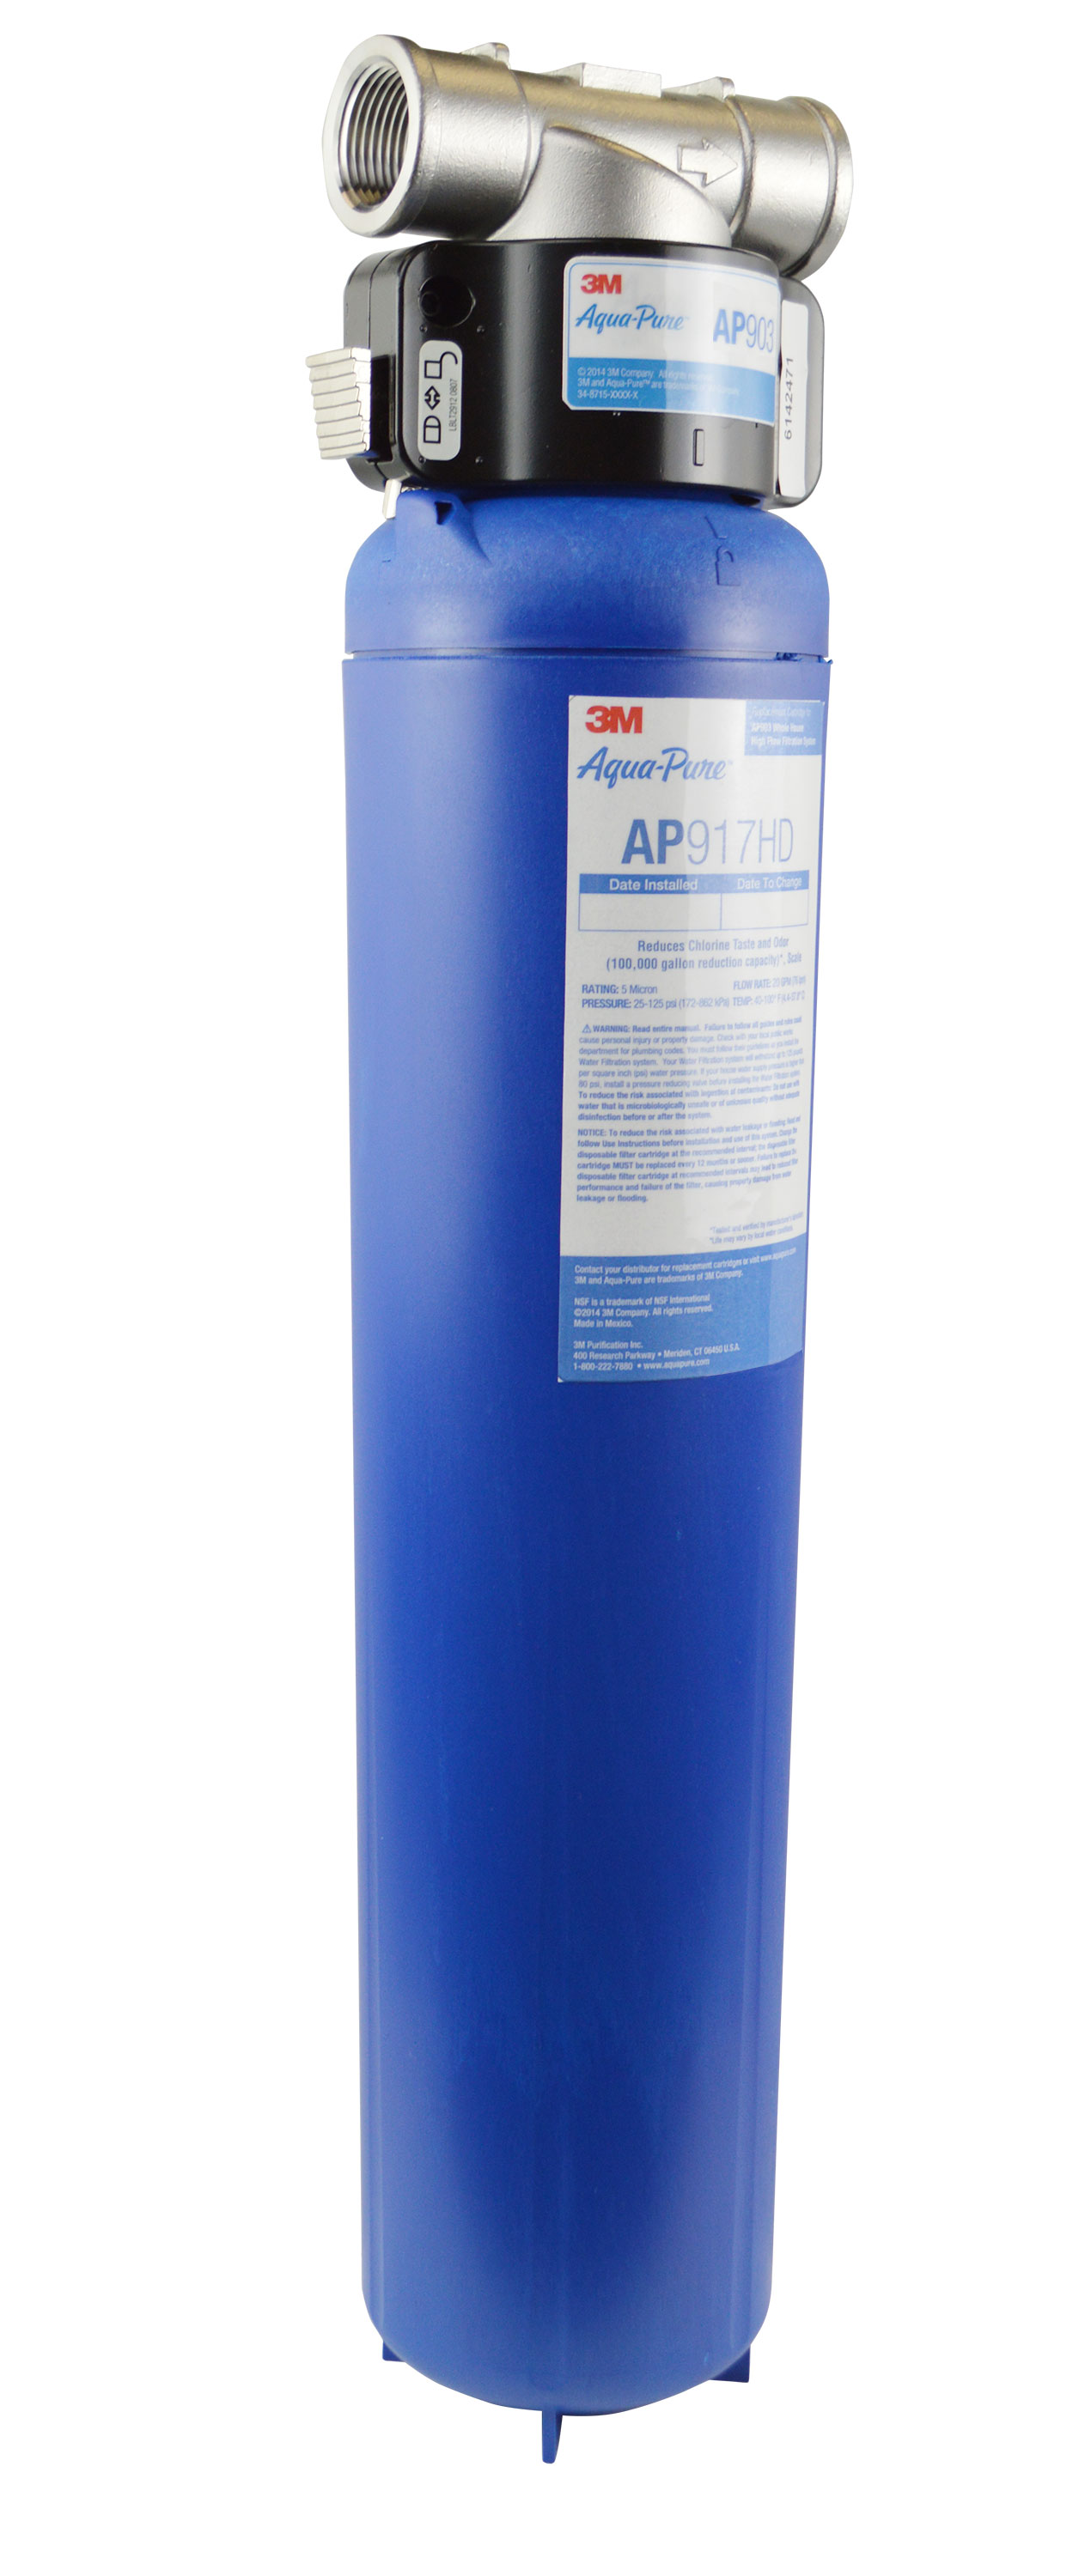 00016145191947 3M™ Aqua-Pure™ AP900 Series Whole House Water Filtration  System AP903, 5621102, Sanitary Quick-Change, um, 1/Case Aircraft  products na 9349706